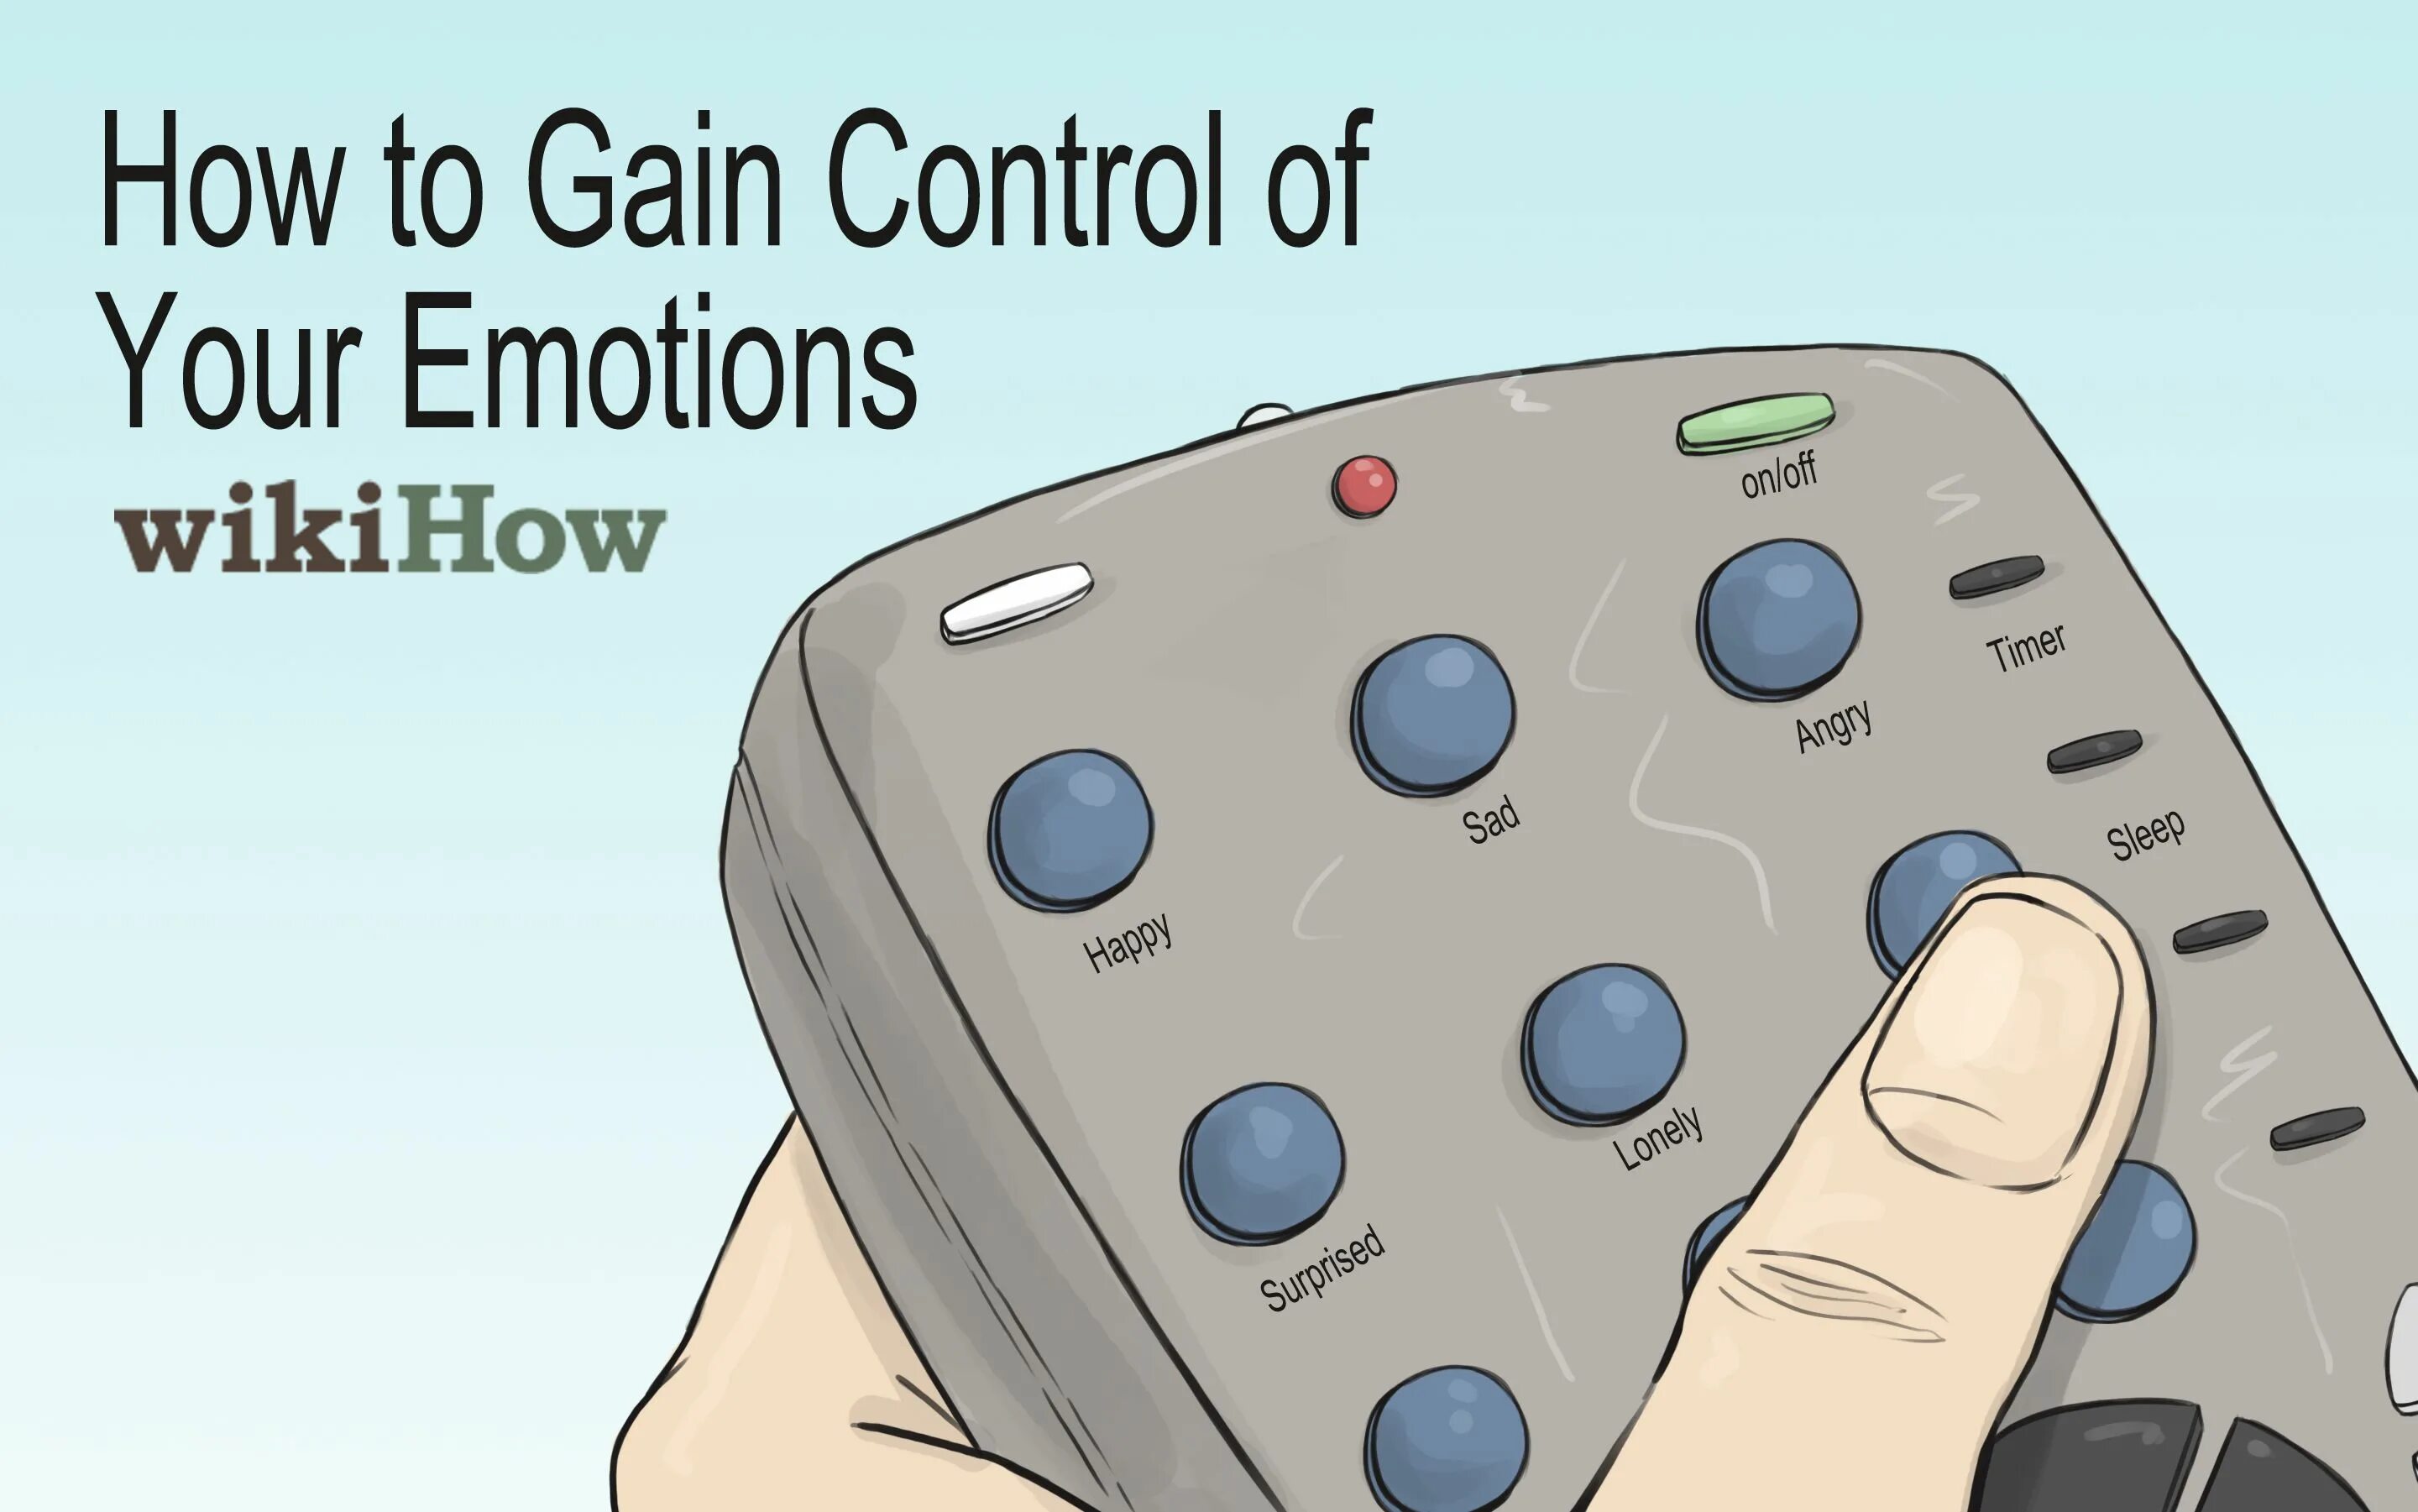 Gain control. How to Control your emotions. Control your emotions avto. Что значит gain Control.